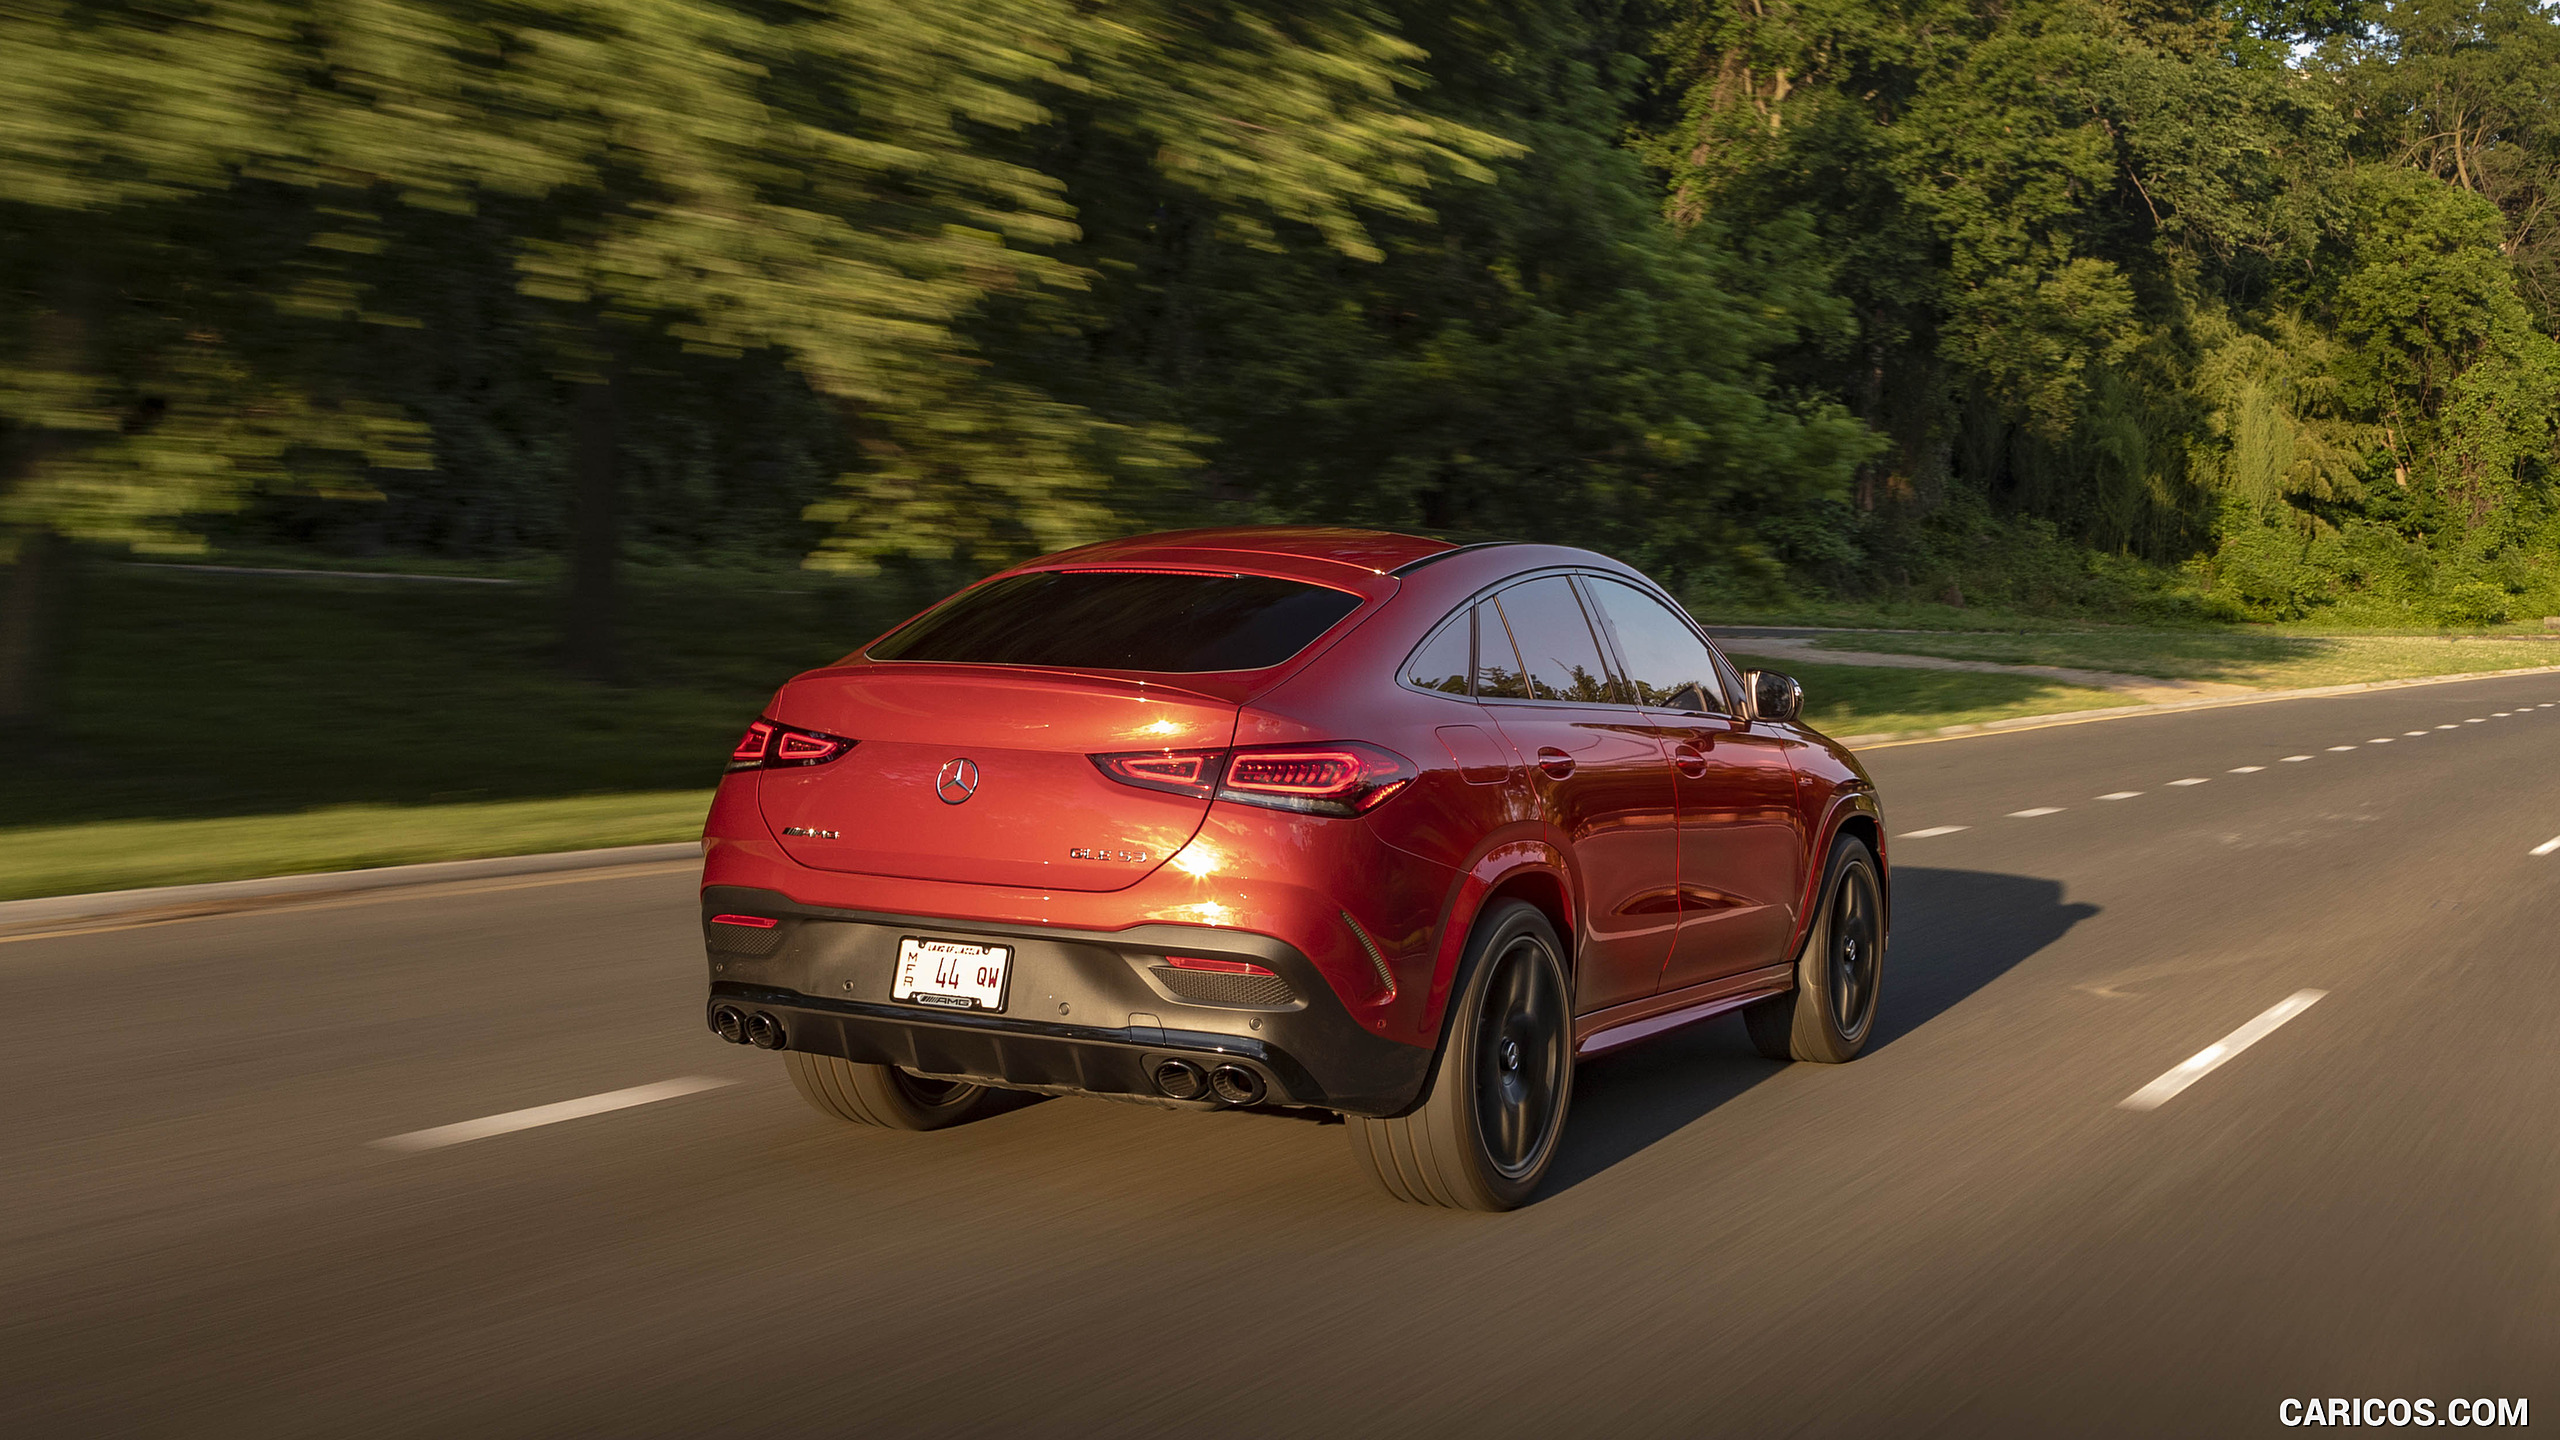 2021 Mercedes-AMG GLE 53 Coupe - Rear Three-Quarter, #99 of 178